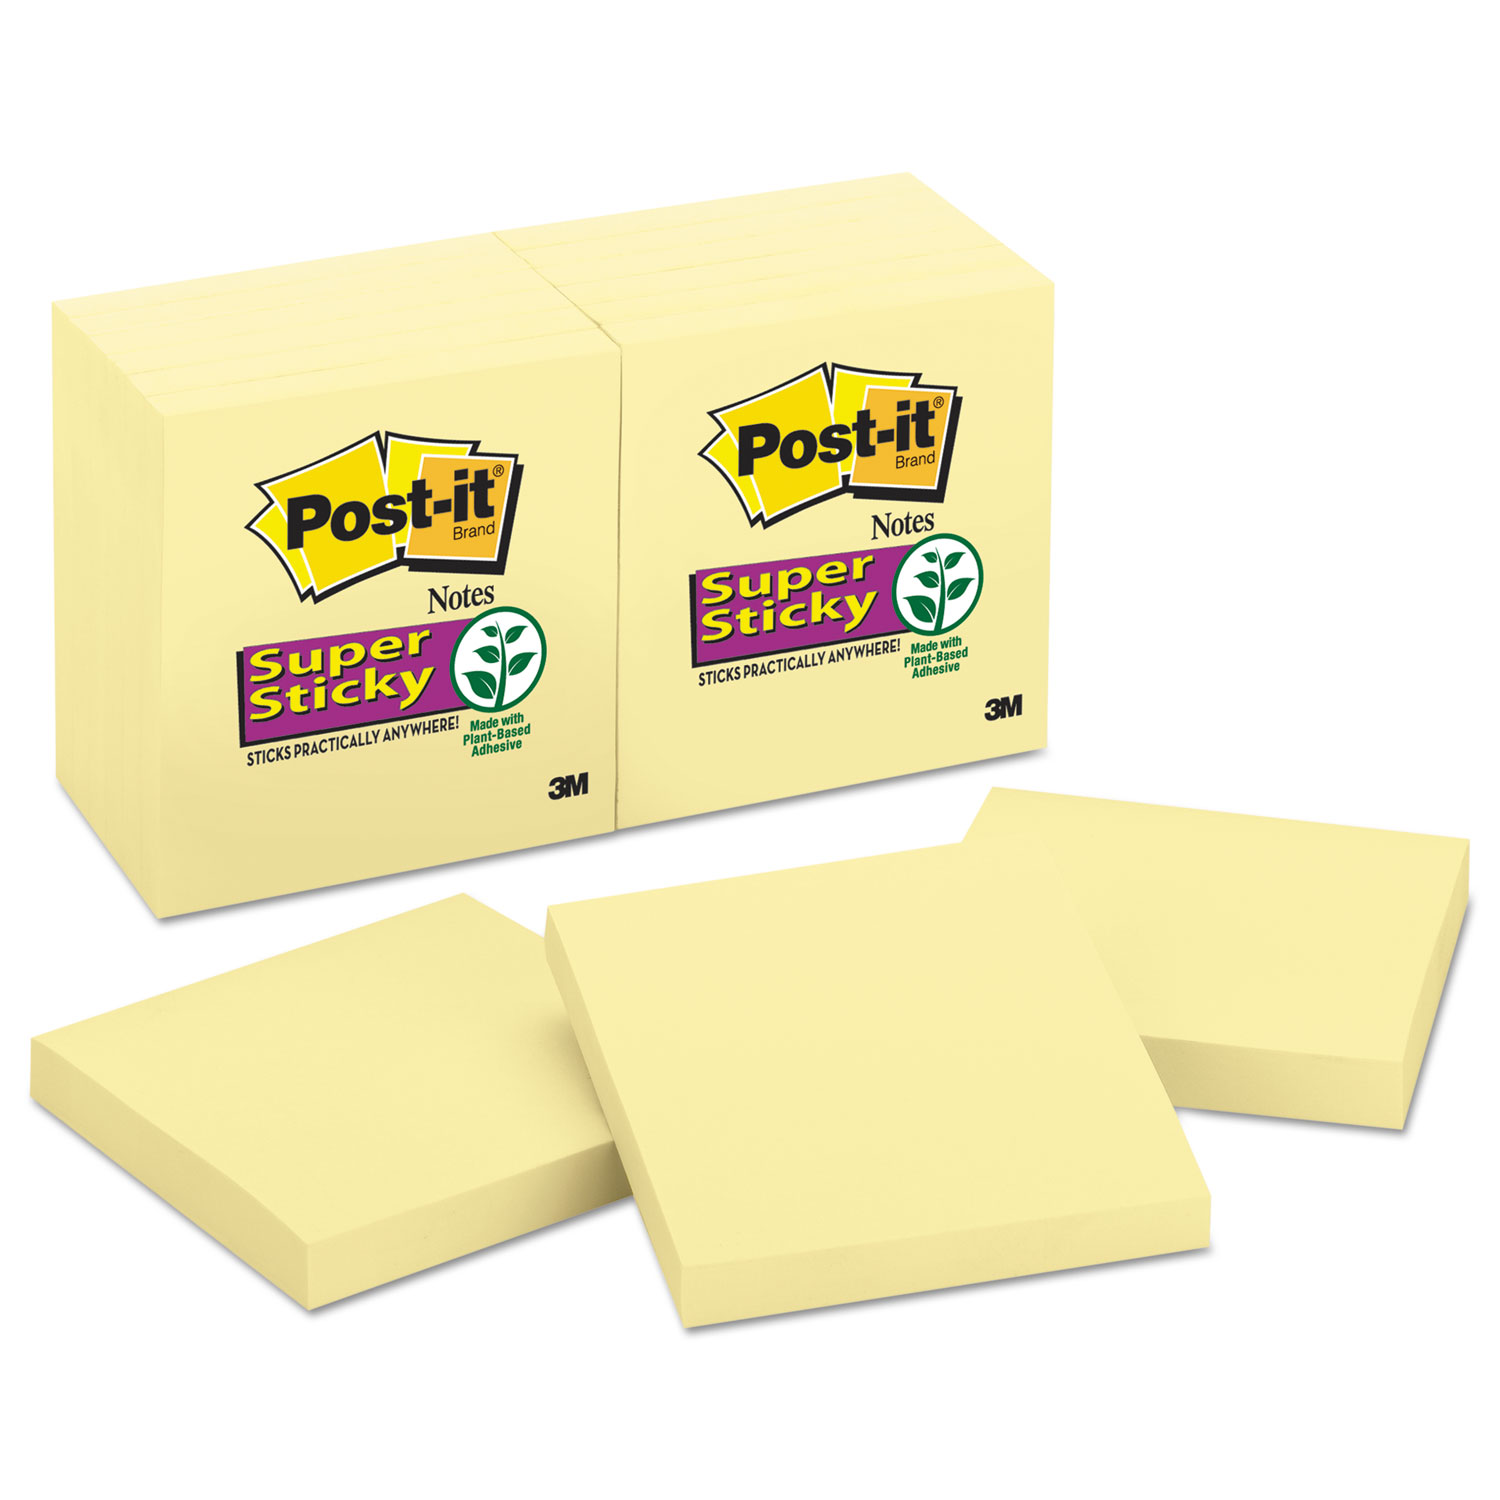 Post-it Pads in Canary Yellow 3 x 3 90 Sheets/Pad 12 Pads/Pack